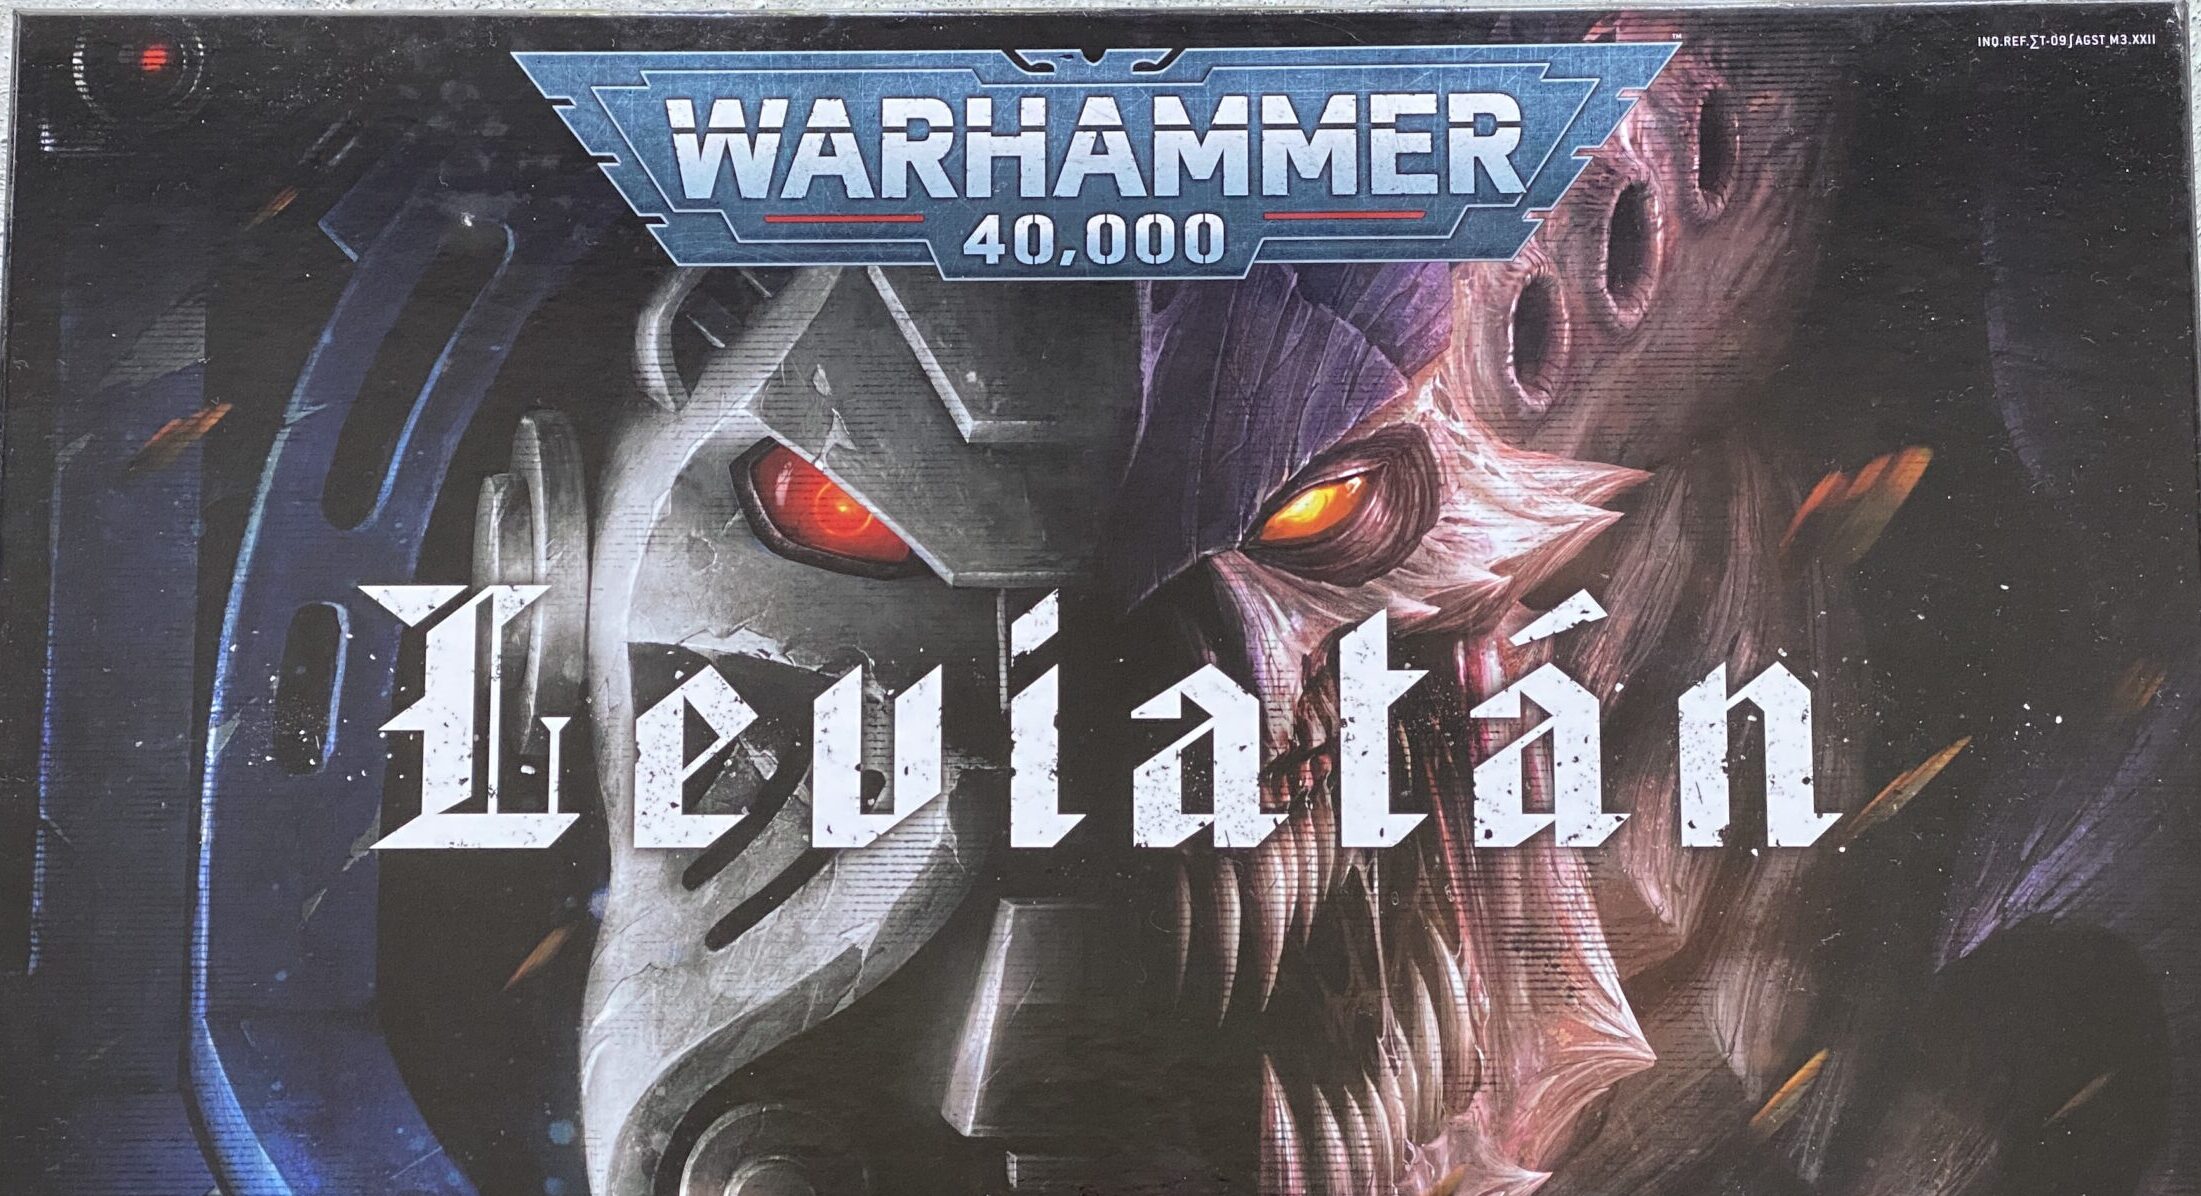 Unboxing of the new Warhammer 40.000 Leviathan box